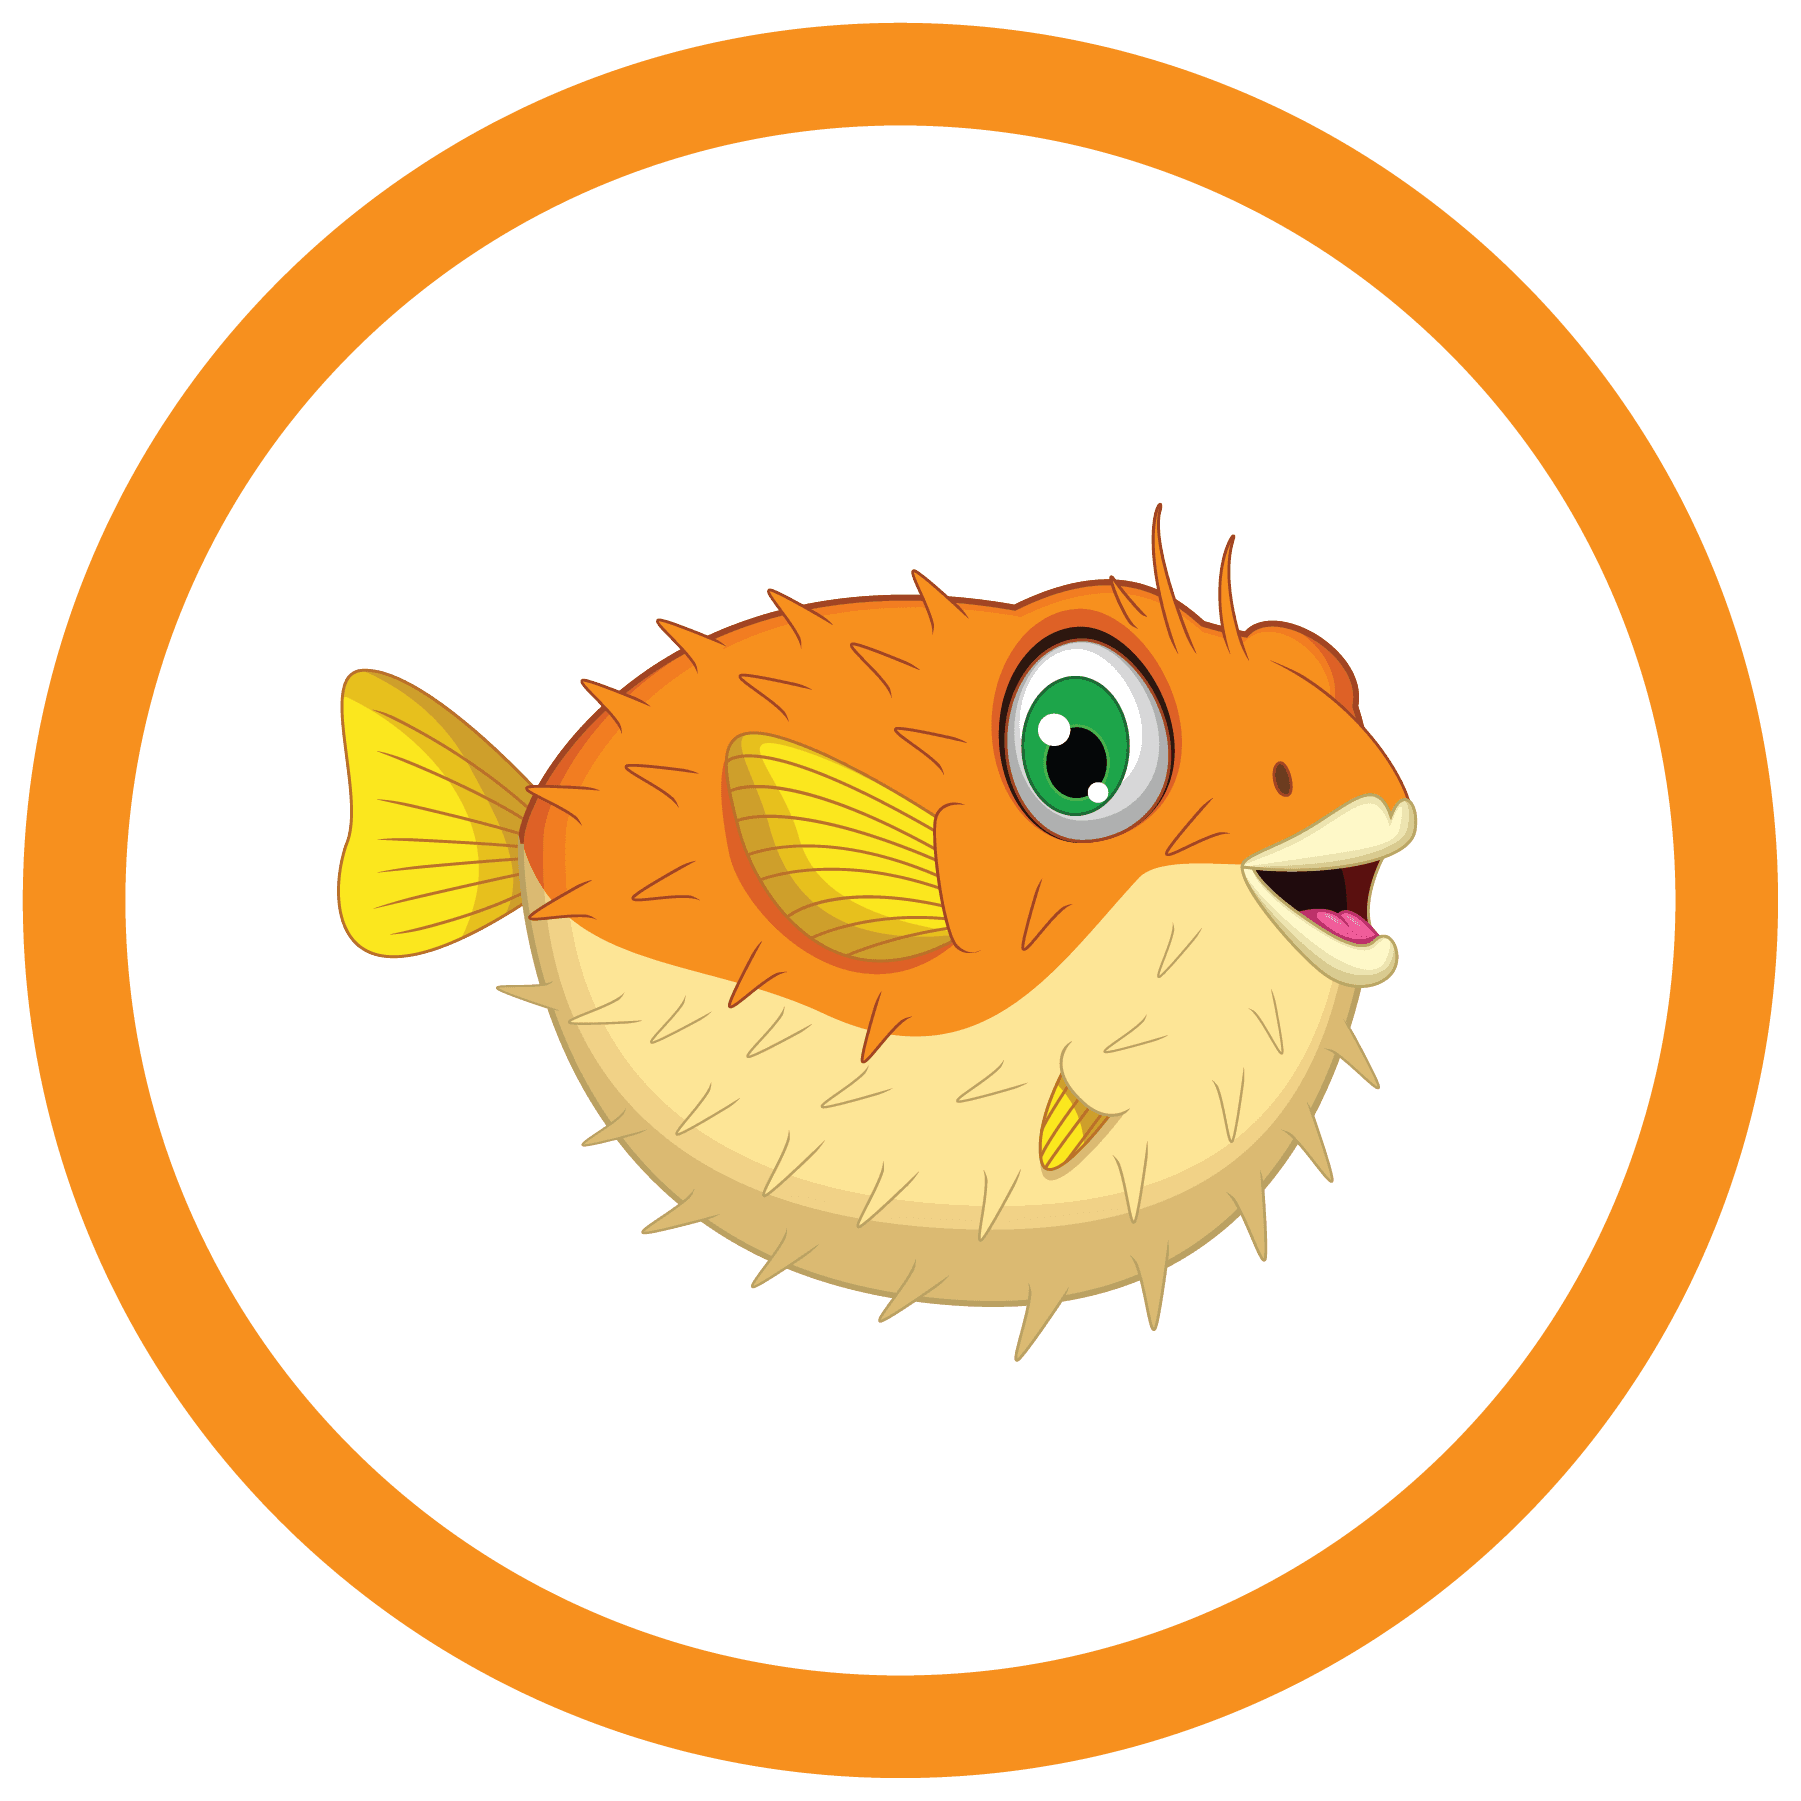 Fish clipart balloon, Fish balloon Transparent FREE for.